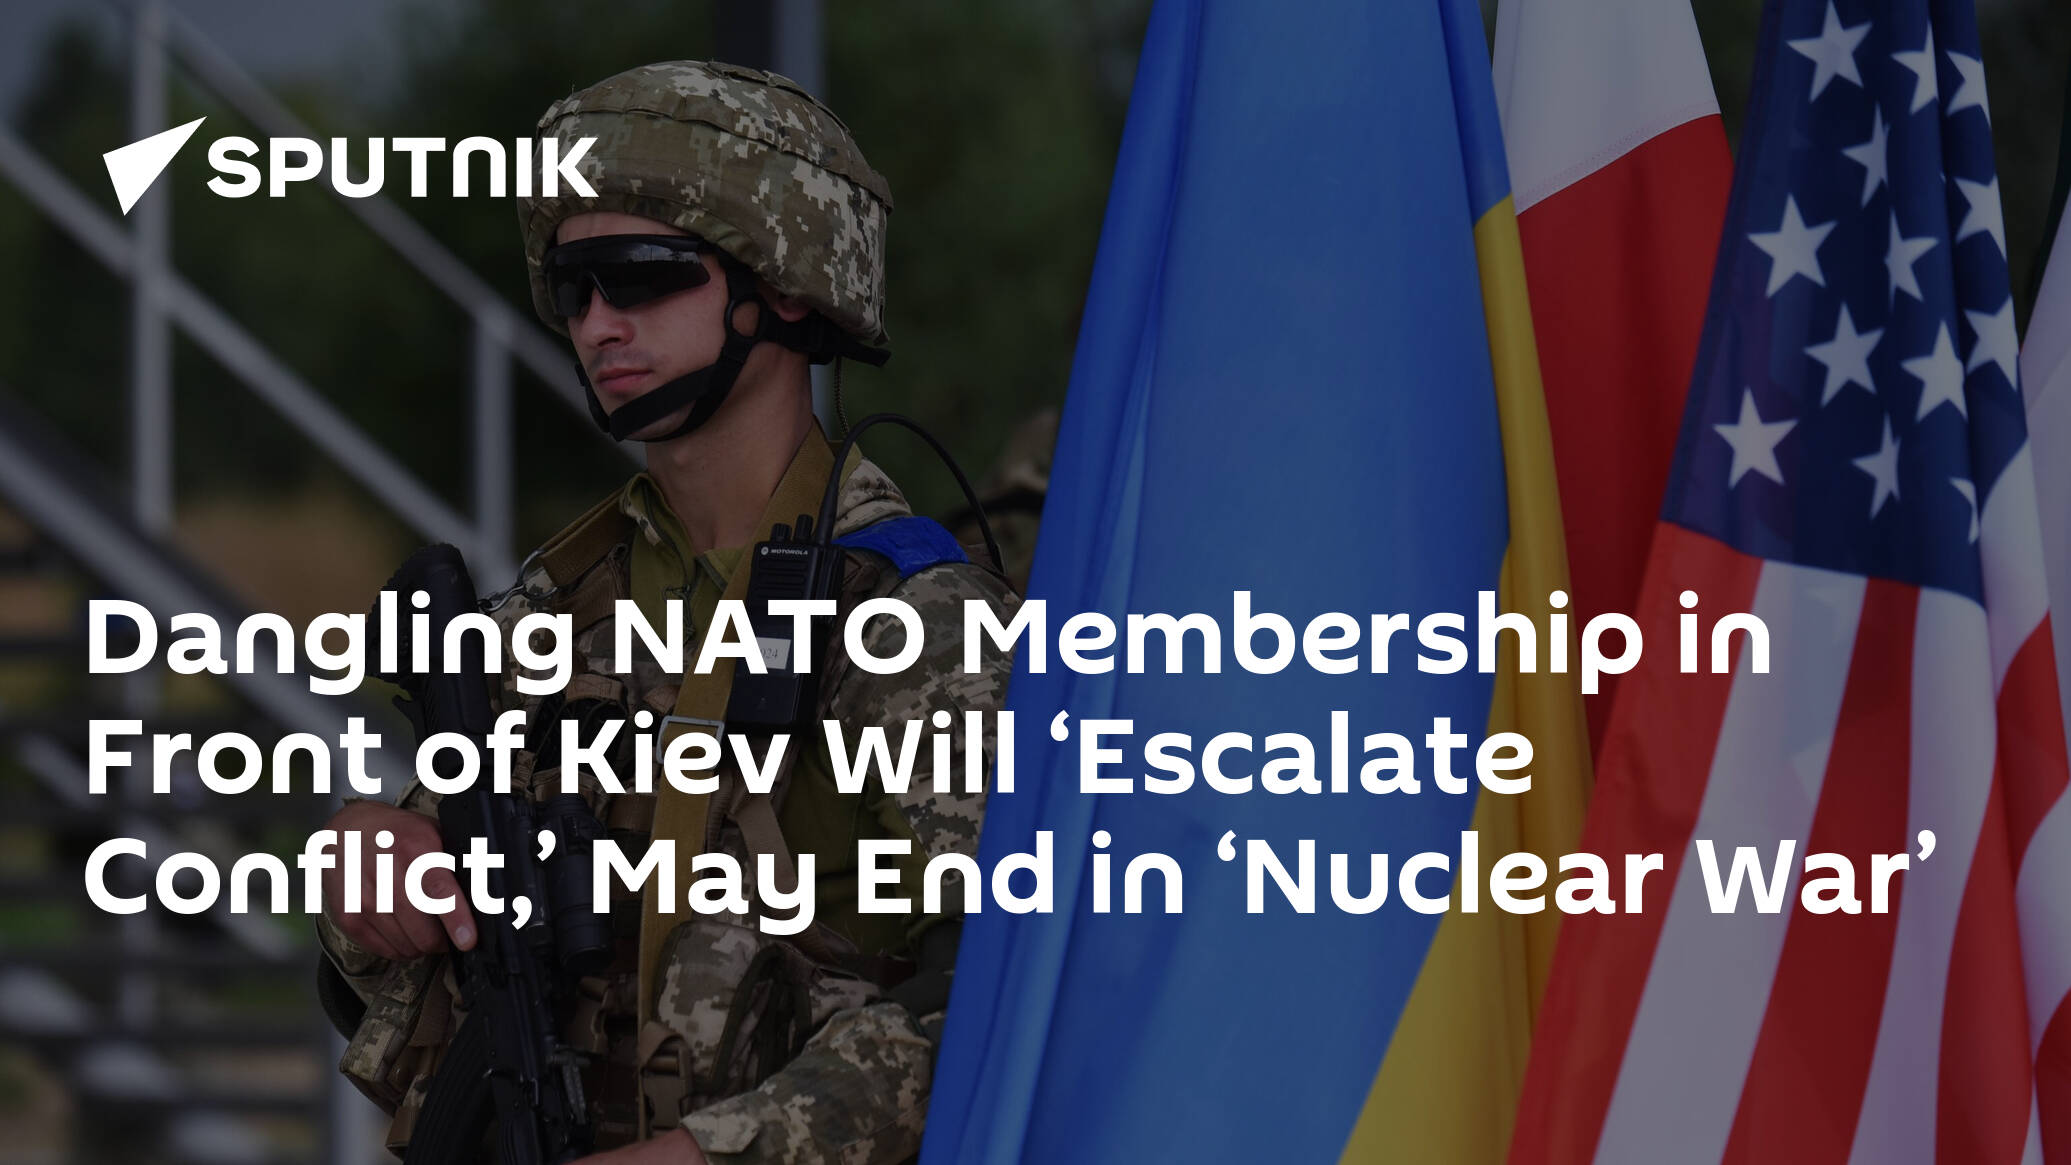 Dangling NATO Membership in Front of Kiev Will ‘Escalate Conflict,’ May End in ‘Nuclear War’